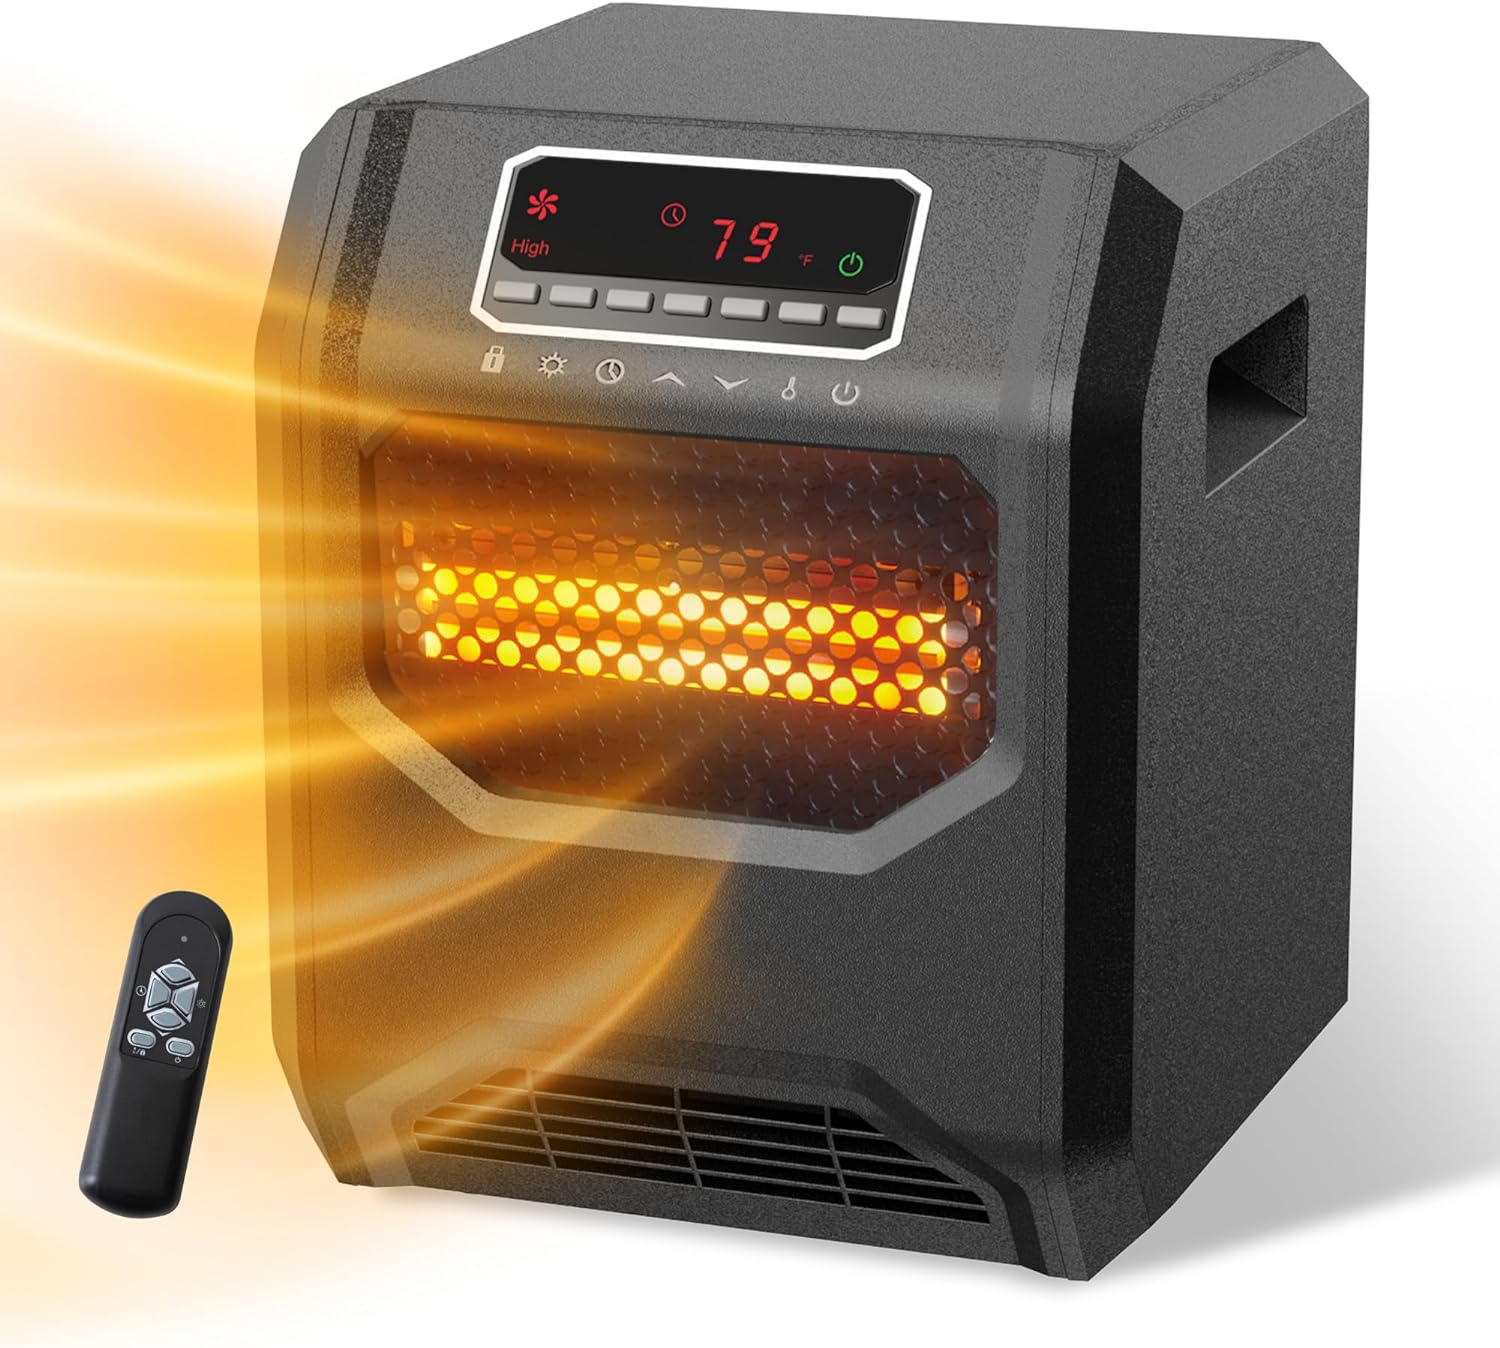 WEWARM Space Heater for Indoor Use, 1500W Electric Room Heaters Infrared Quartz Heaters with Thermostat, Portable Space Heater with 6 Heating Elements and Remote Control for Office Bedroom